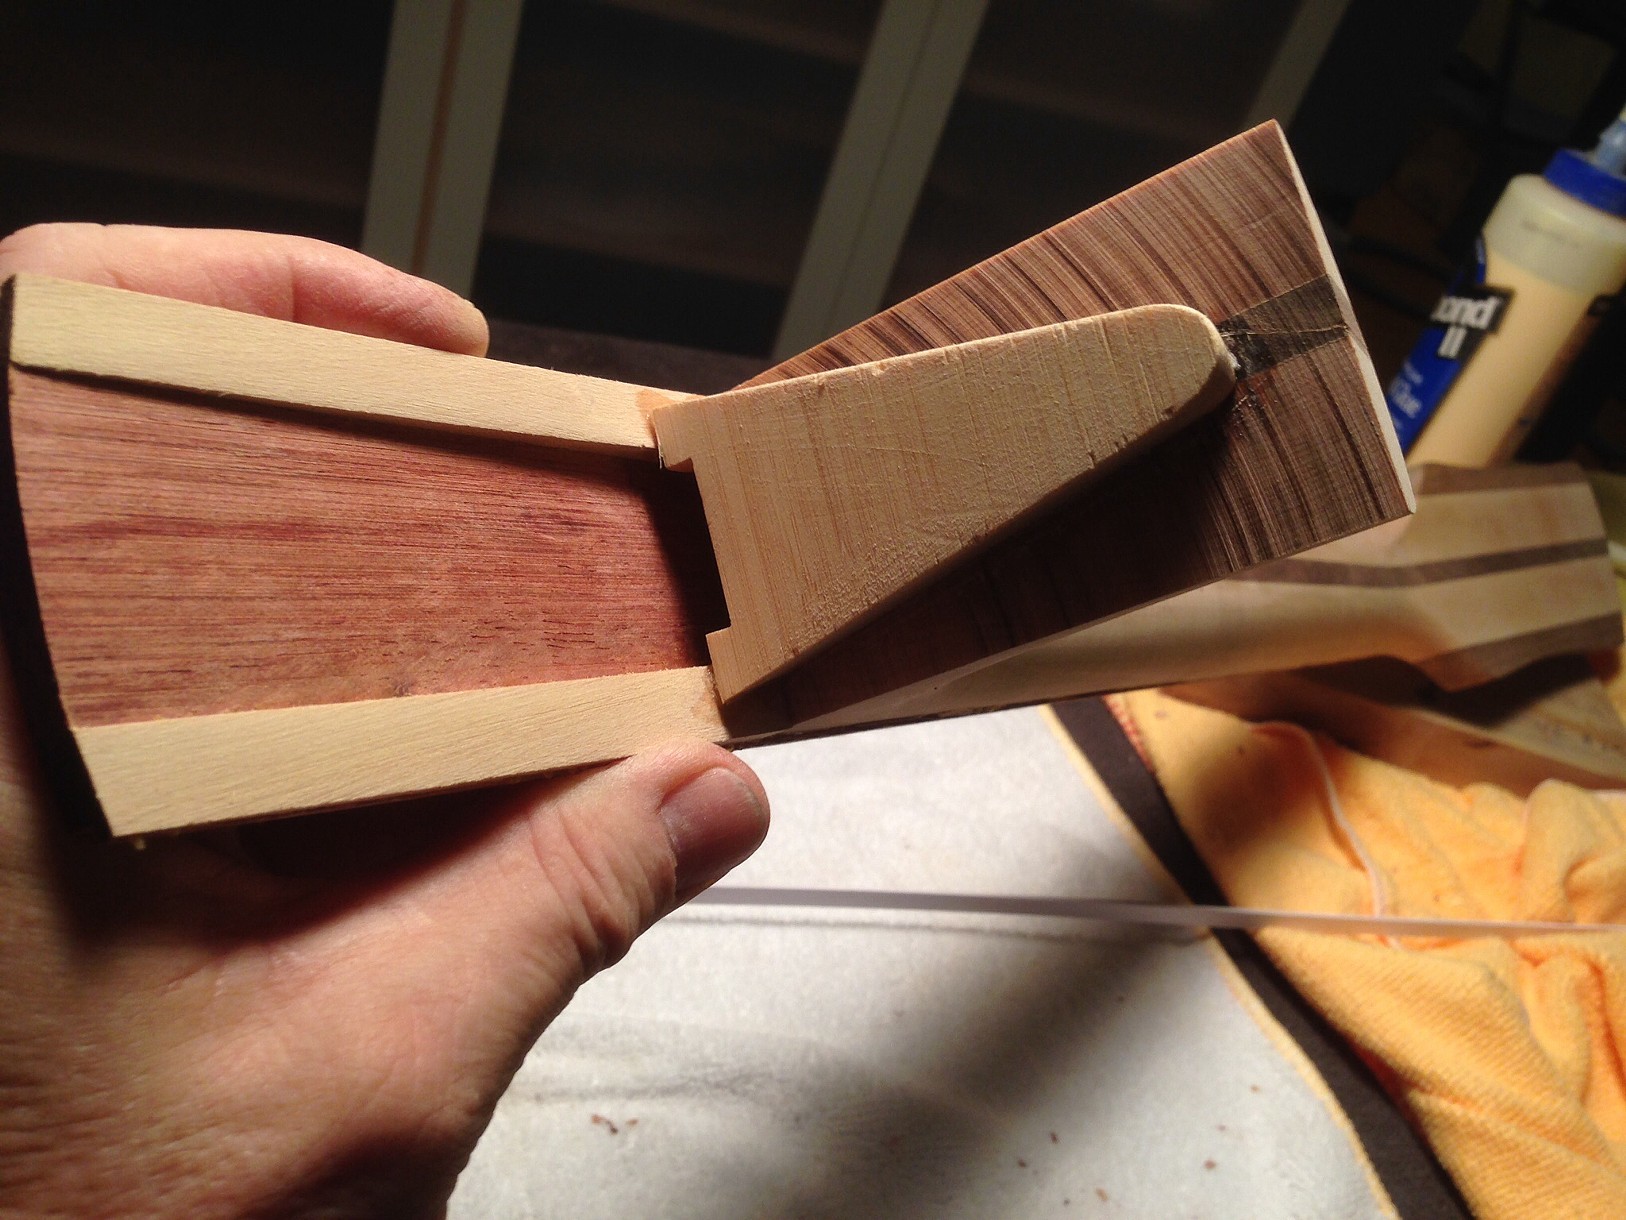 ANOTHER VIEW OF THE DOVETAIL END OF THE SAME NECK.